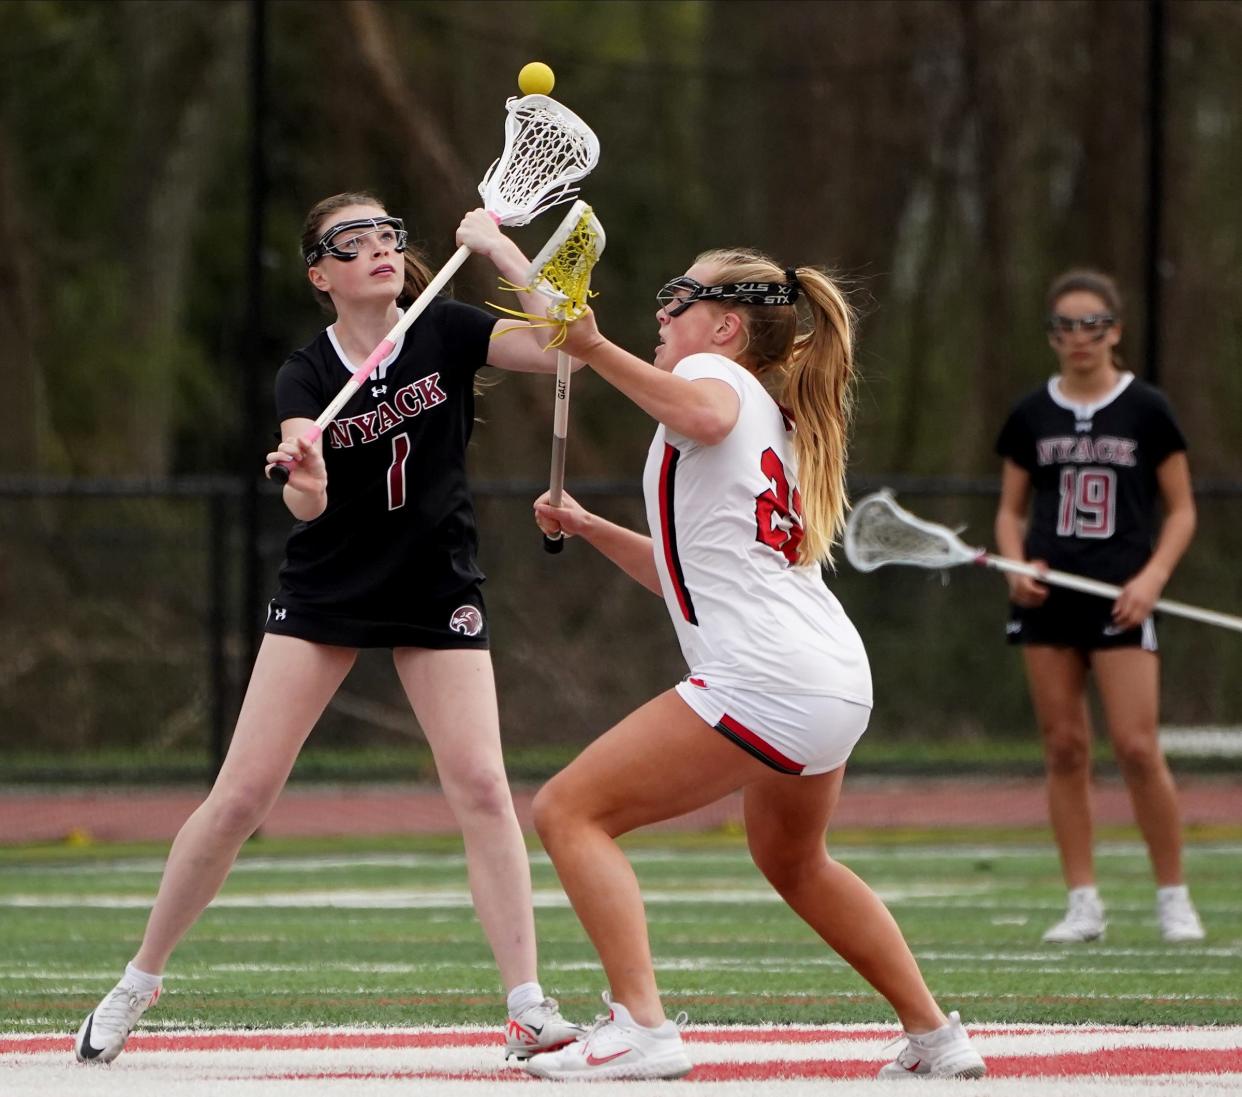 Nyack V Rye Girls Lacrosse
Nyack's Casey Cummings (1) and Rye's Lilly Whaling (22) take a draw in girls lacrosse action at Rye High School in Rye on Wednesday, April 10, 2024. Nyack won 13-11.